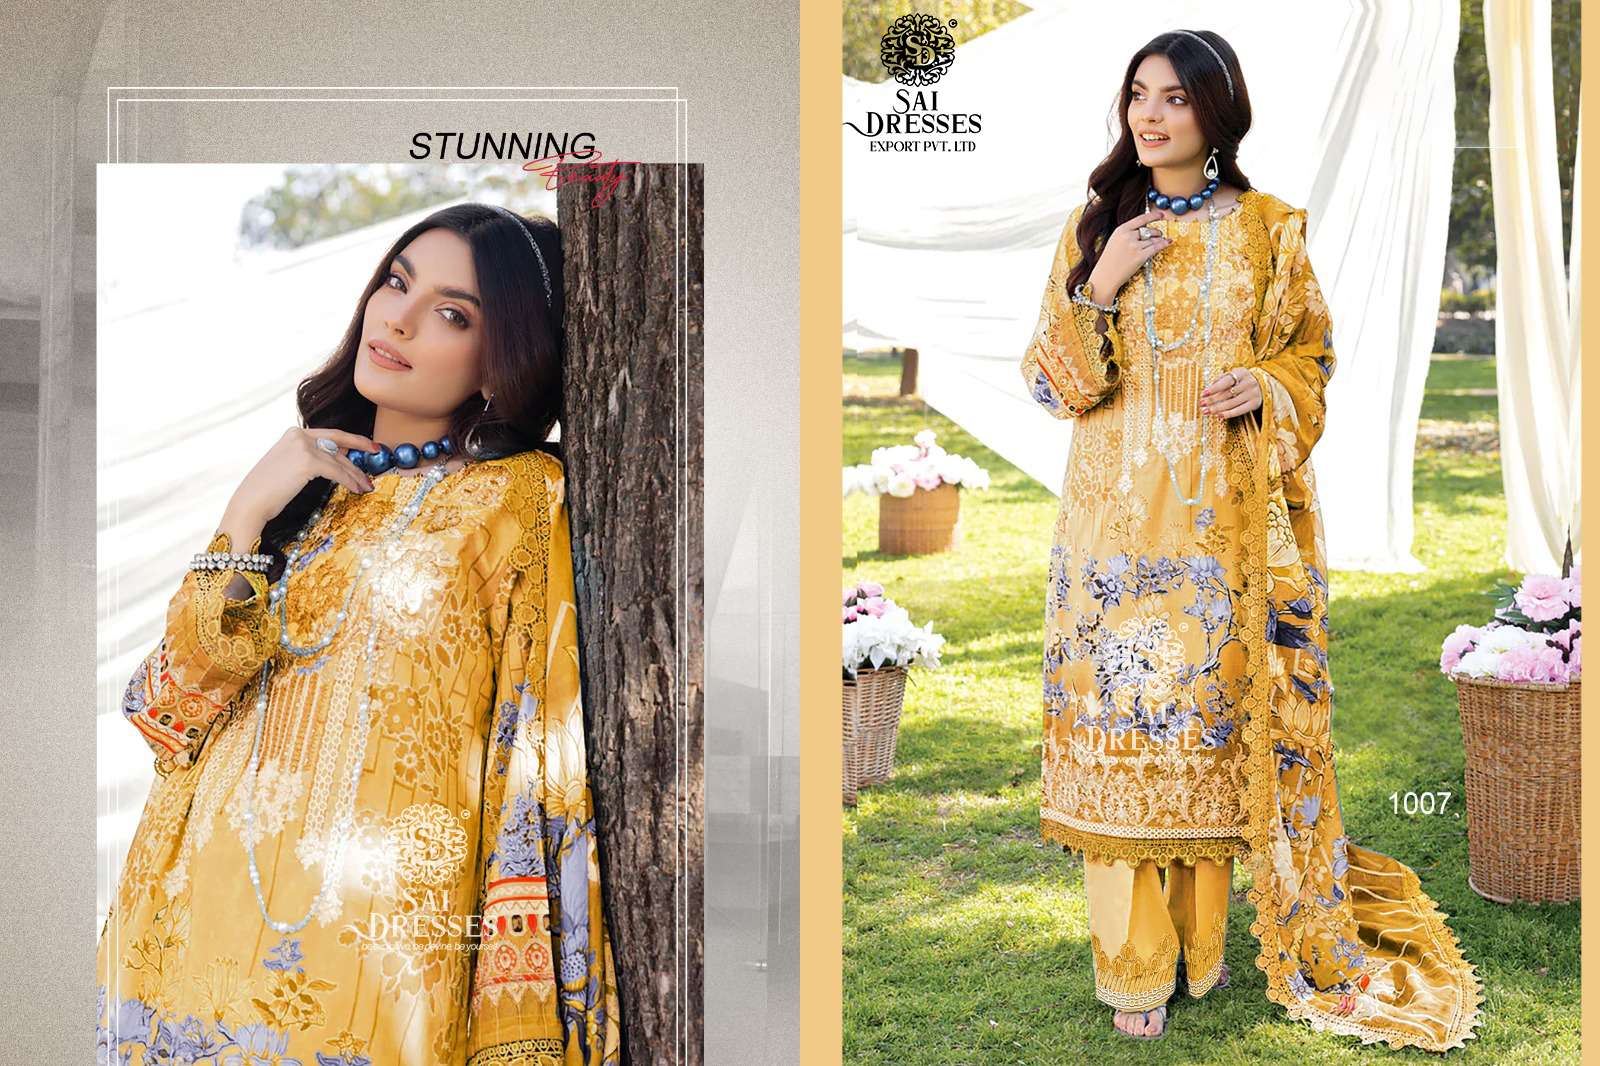 SAI DRESSES PRESENT FIRDOUS LUXURY LAWN VOL 7 JAAM COTTON PATCH EMBROIDERED PAKISTANI SALWAR SUITS IN WHOLESALE RATE IN SURAT